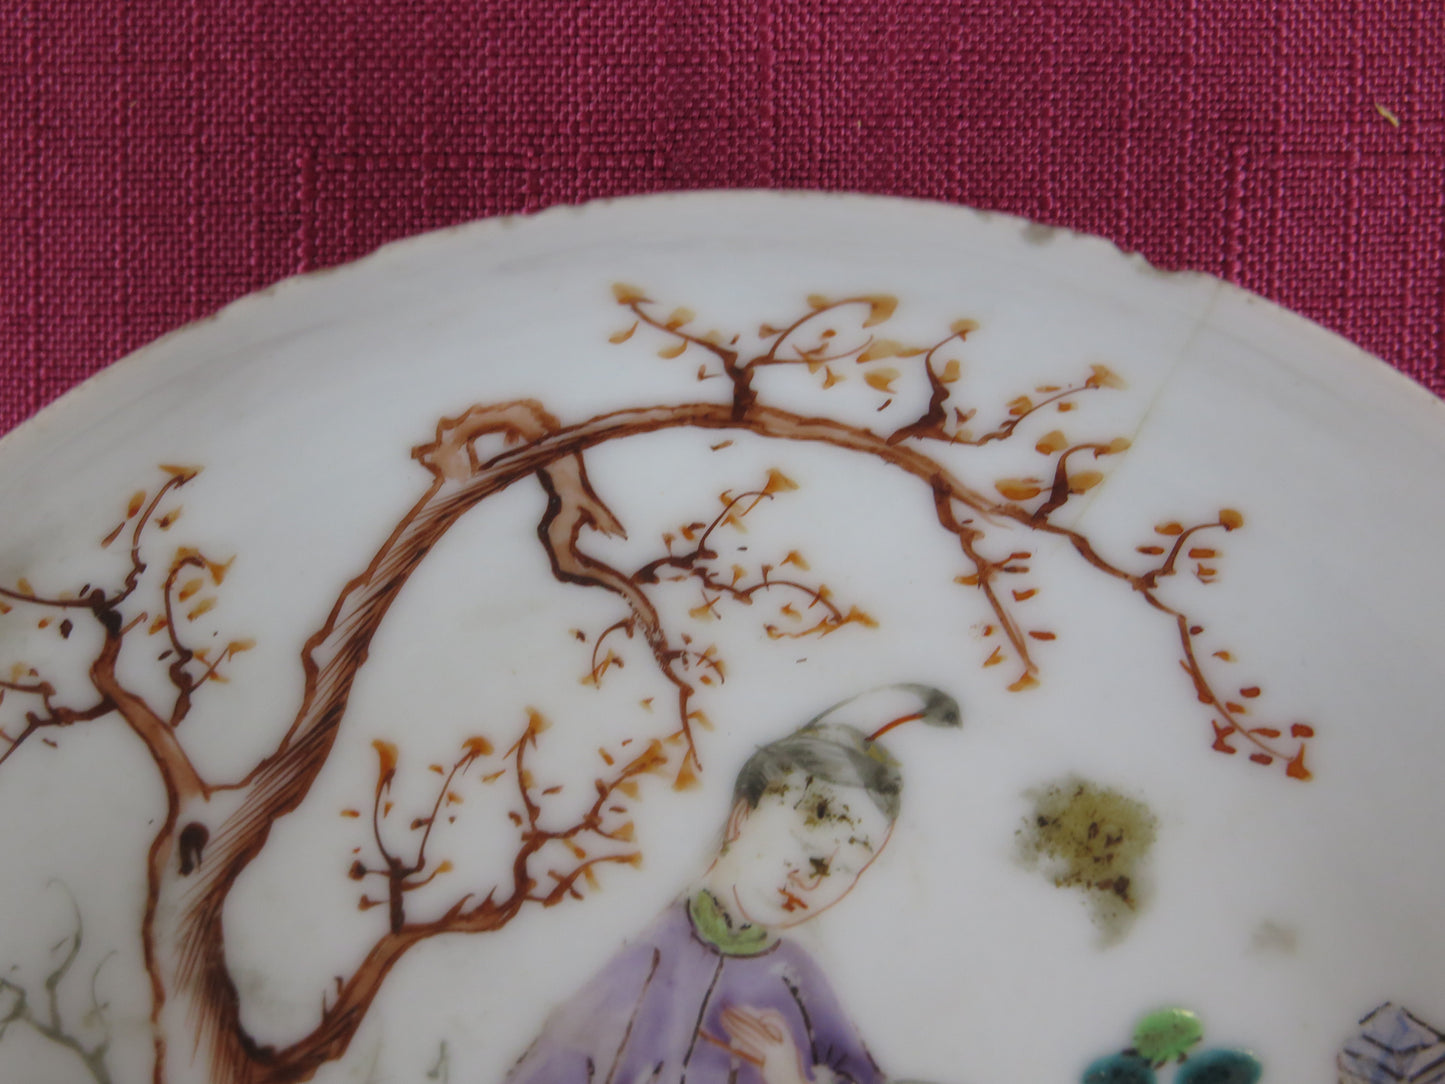 Antique Chinese hand painted porcelain plate China Asia vs14